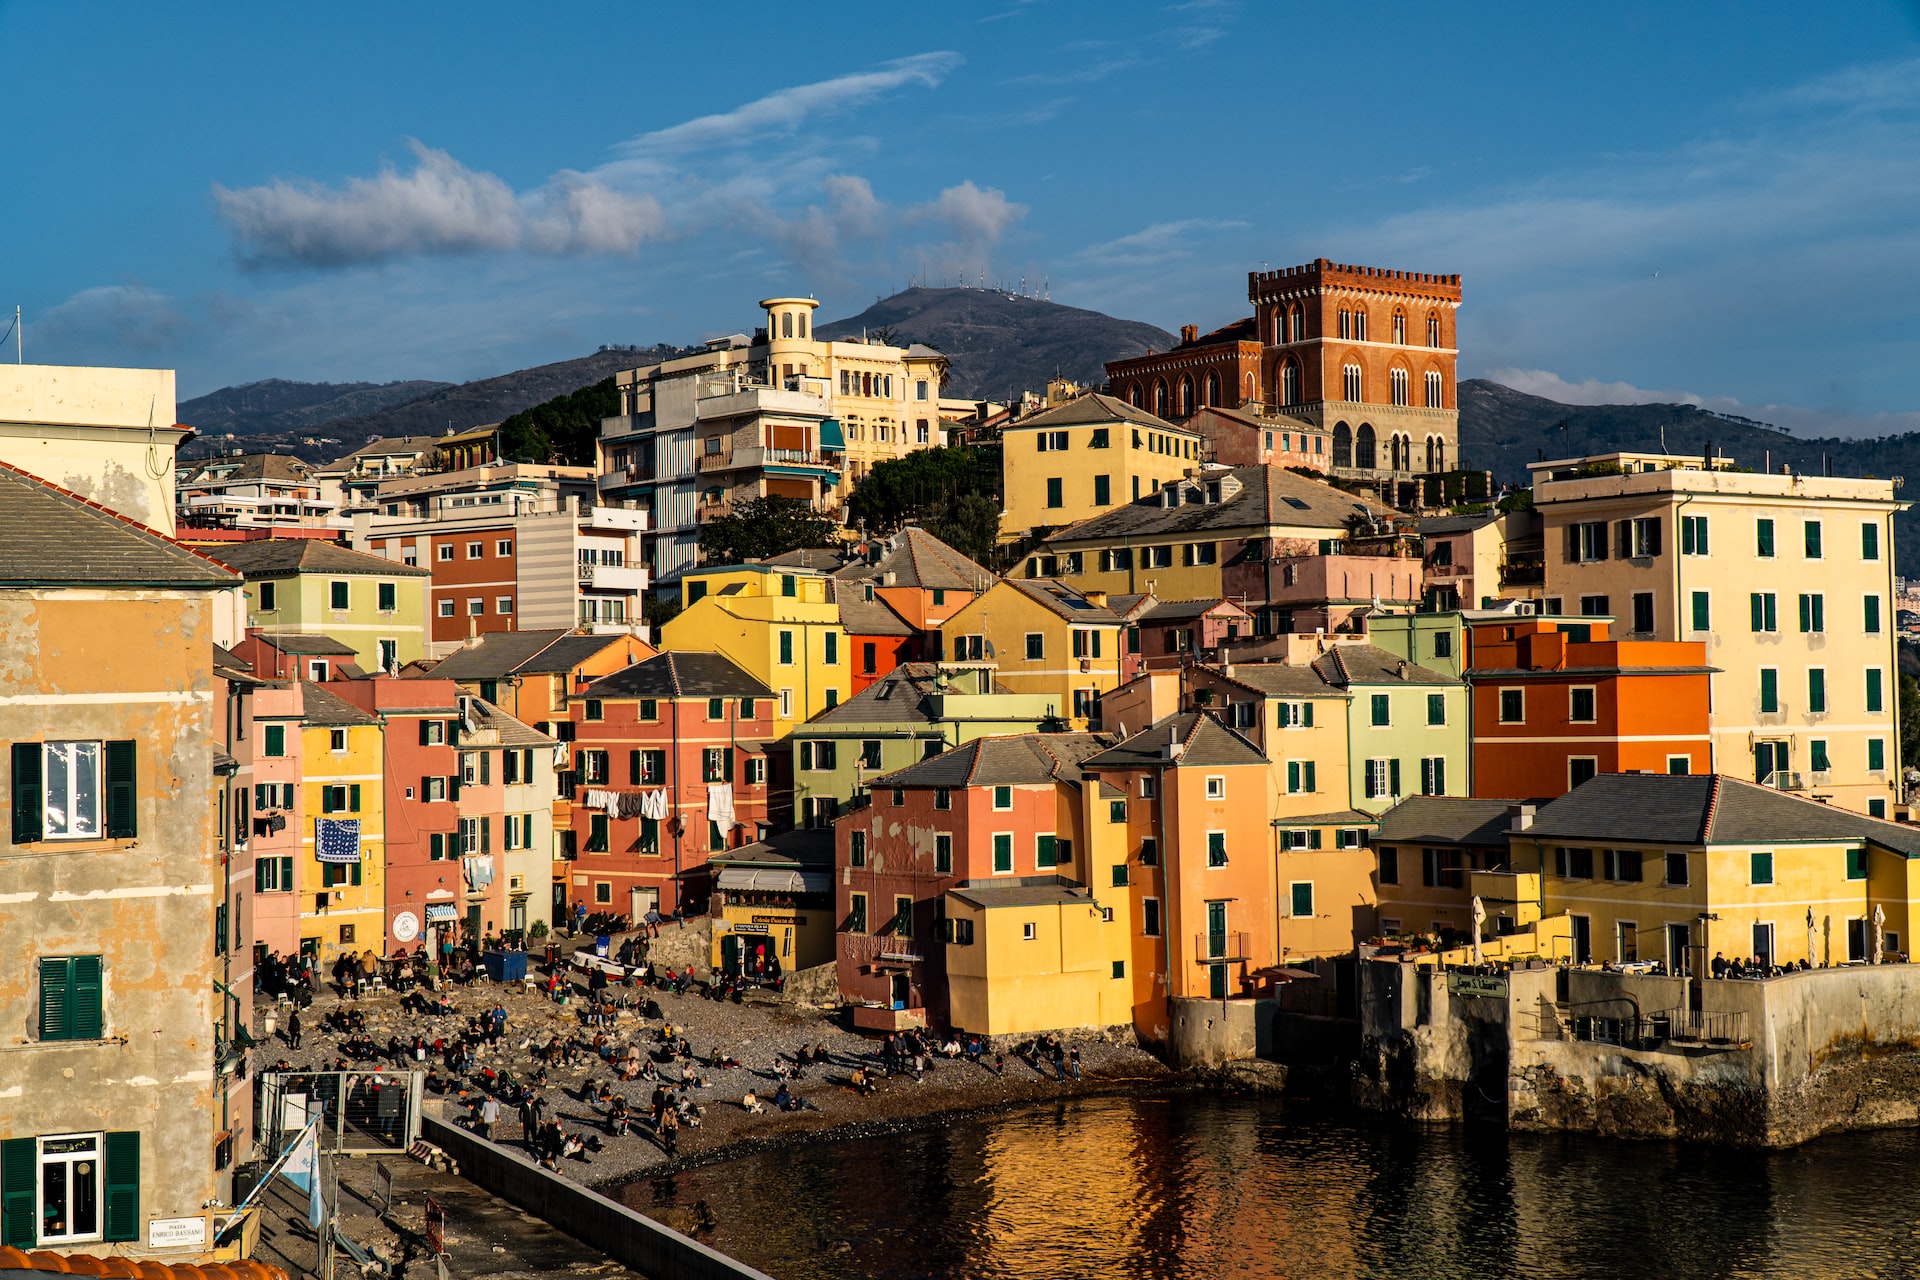 Multi-colored buildings along the waterfront in Genoa.